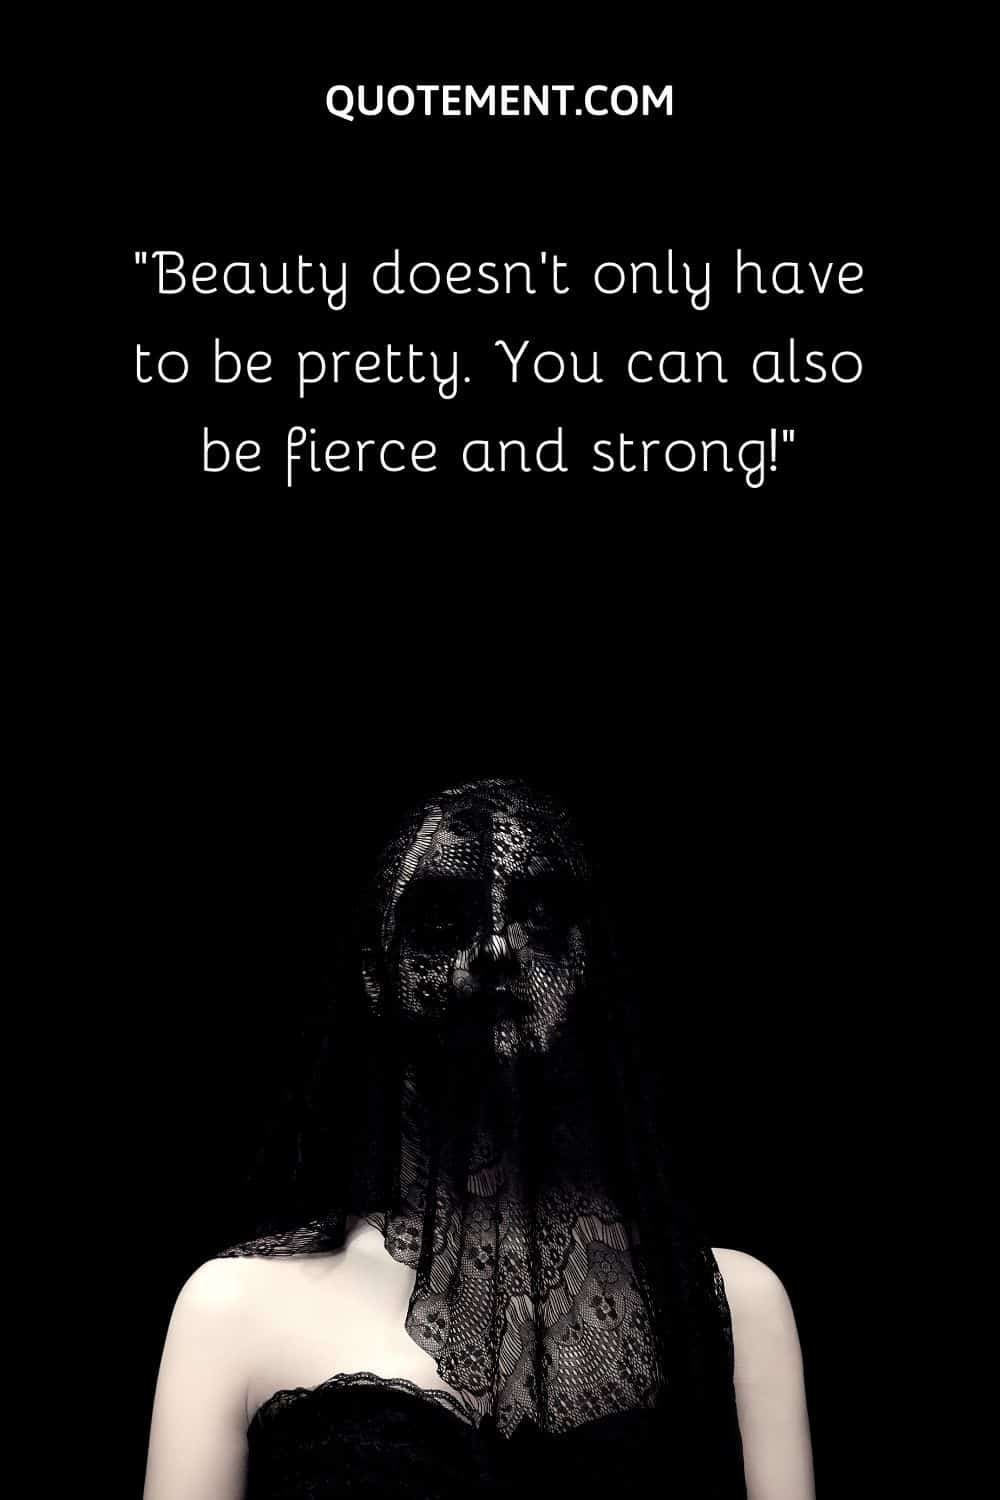 Beauty doesn’t only have to be pretty